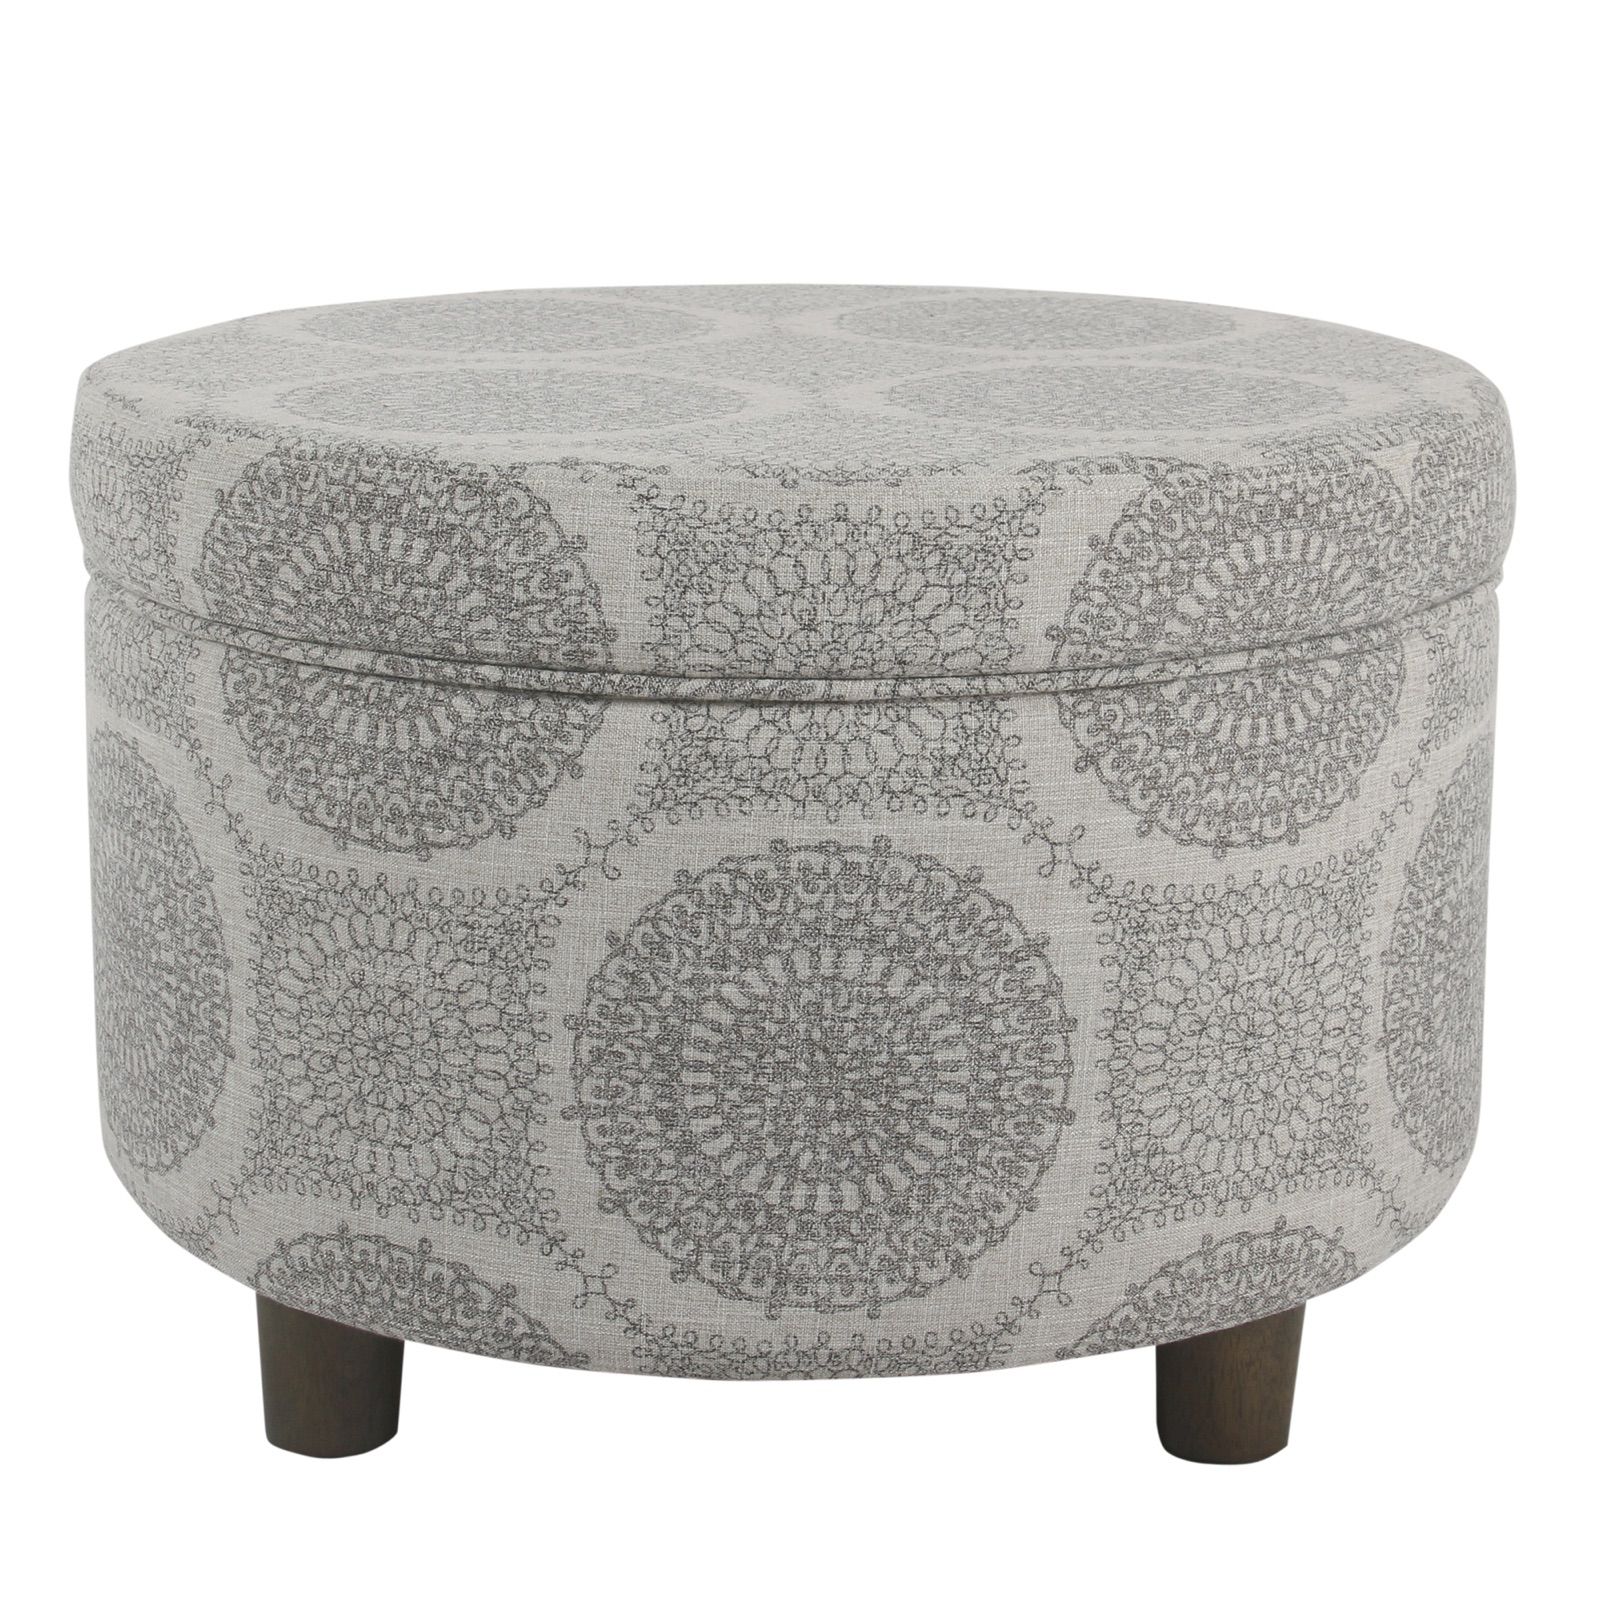 Benzara Wooden Ottoman With Medallion Patterned Fabric Upholstery And In Gray Velvet Ribbed Fabric Round Storage Ottomans (View 10 of 20)